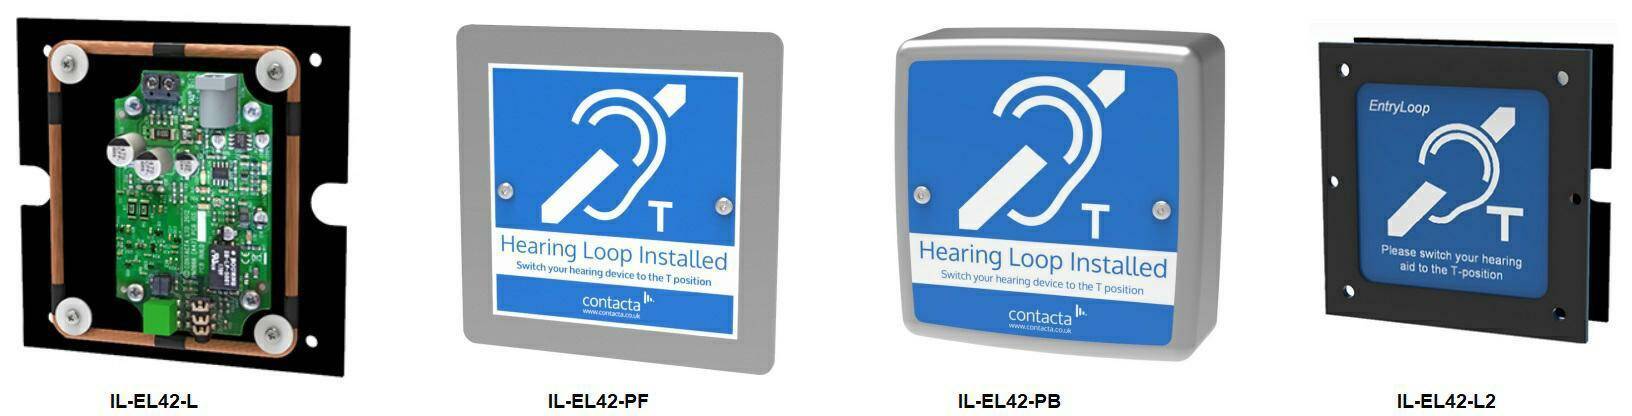 Induction loop in infokiosk - improving accessibility in retail facilities